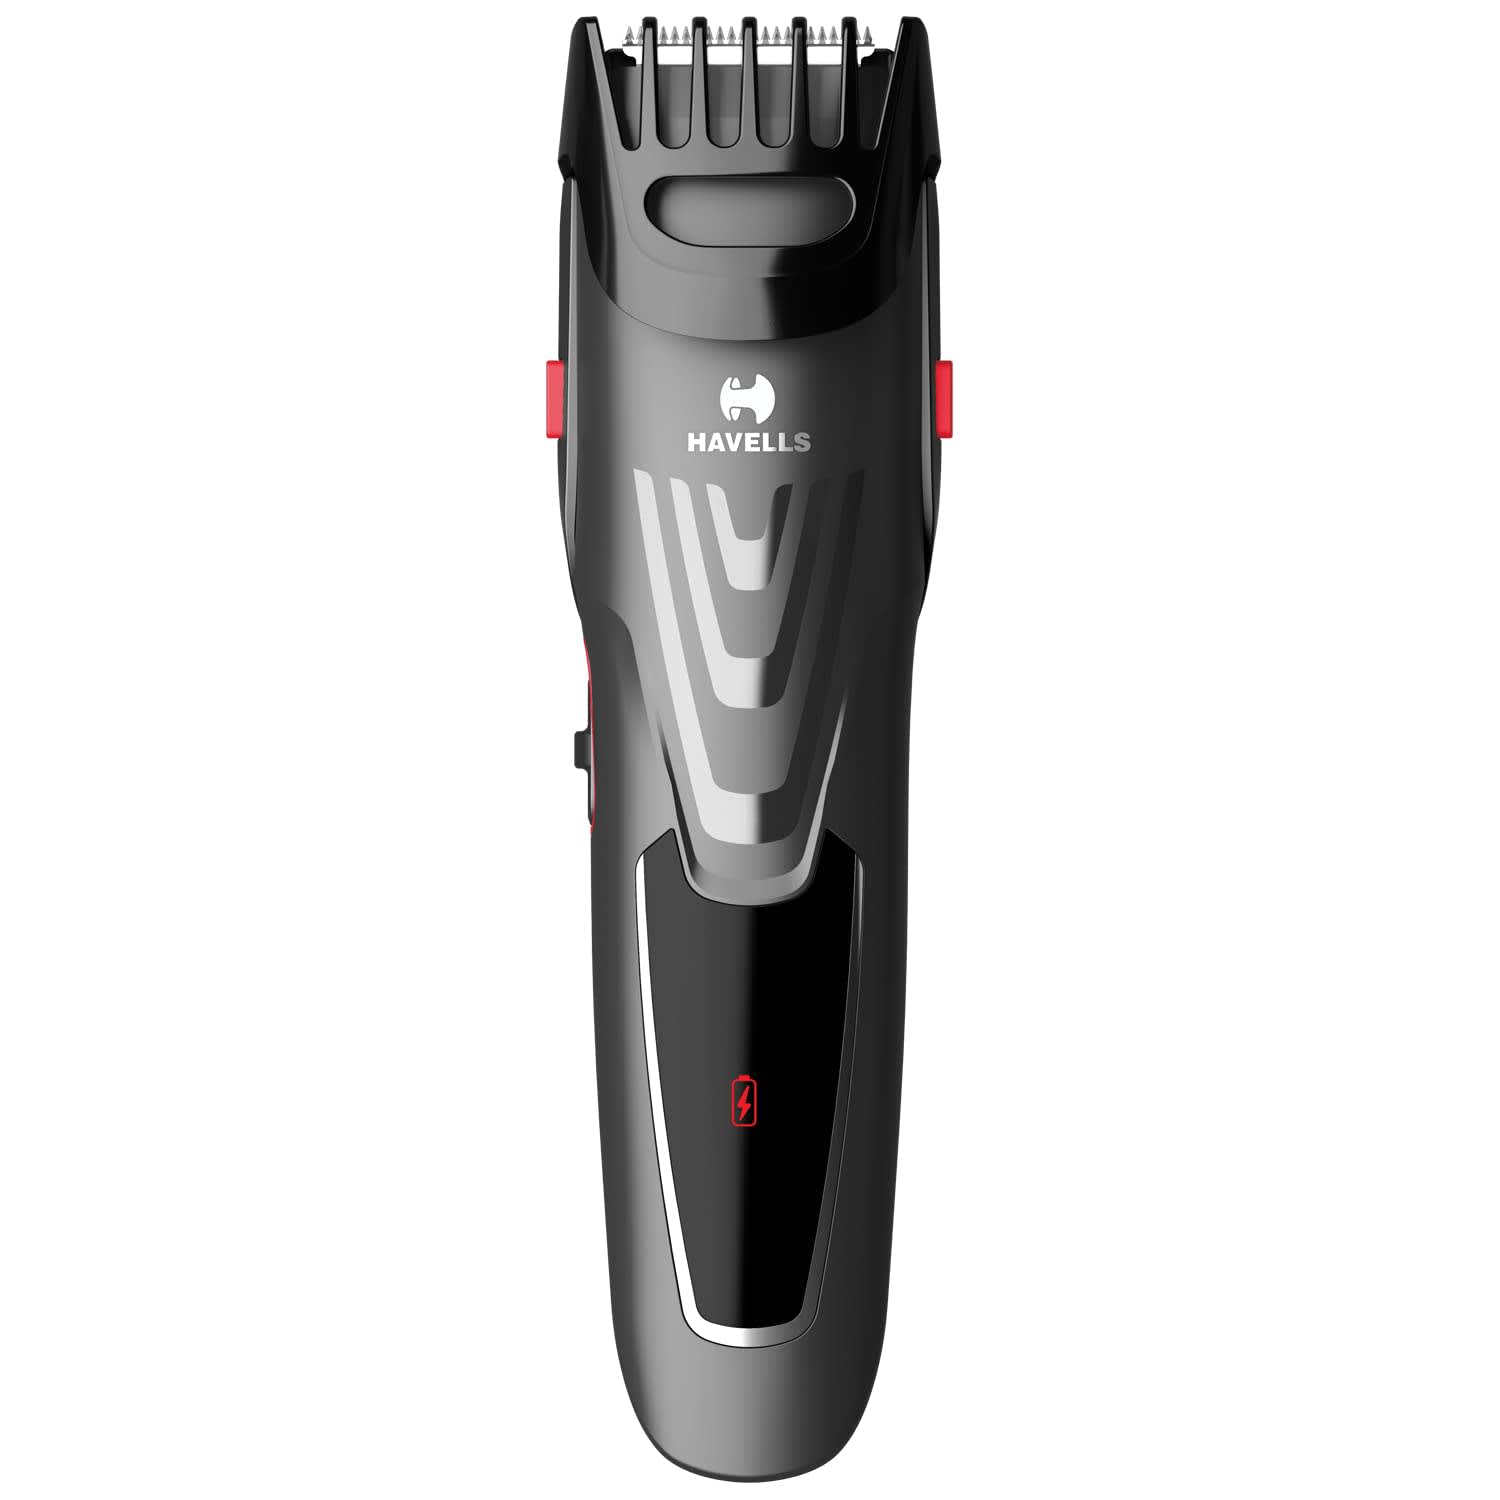 Havells BT5302 Rechargeable Beard & Moustache Trimmer for Men with 20 Length Settings, Titanium Blade for Smooth Trim (Grey & Red)